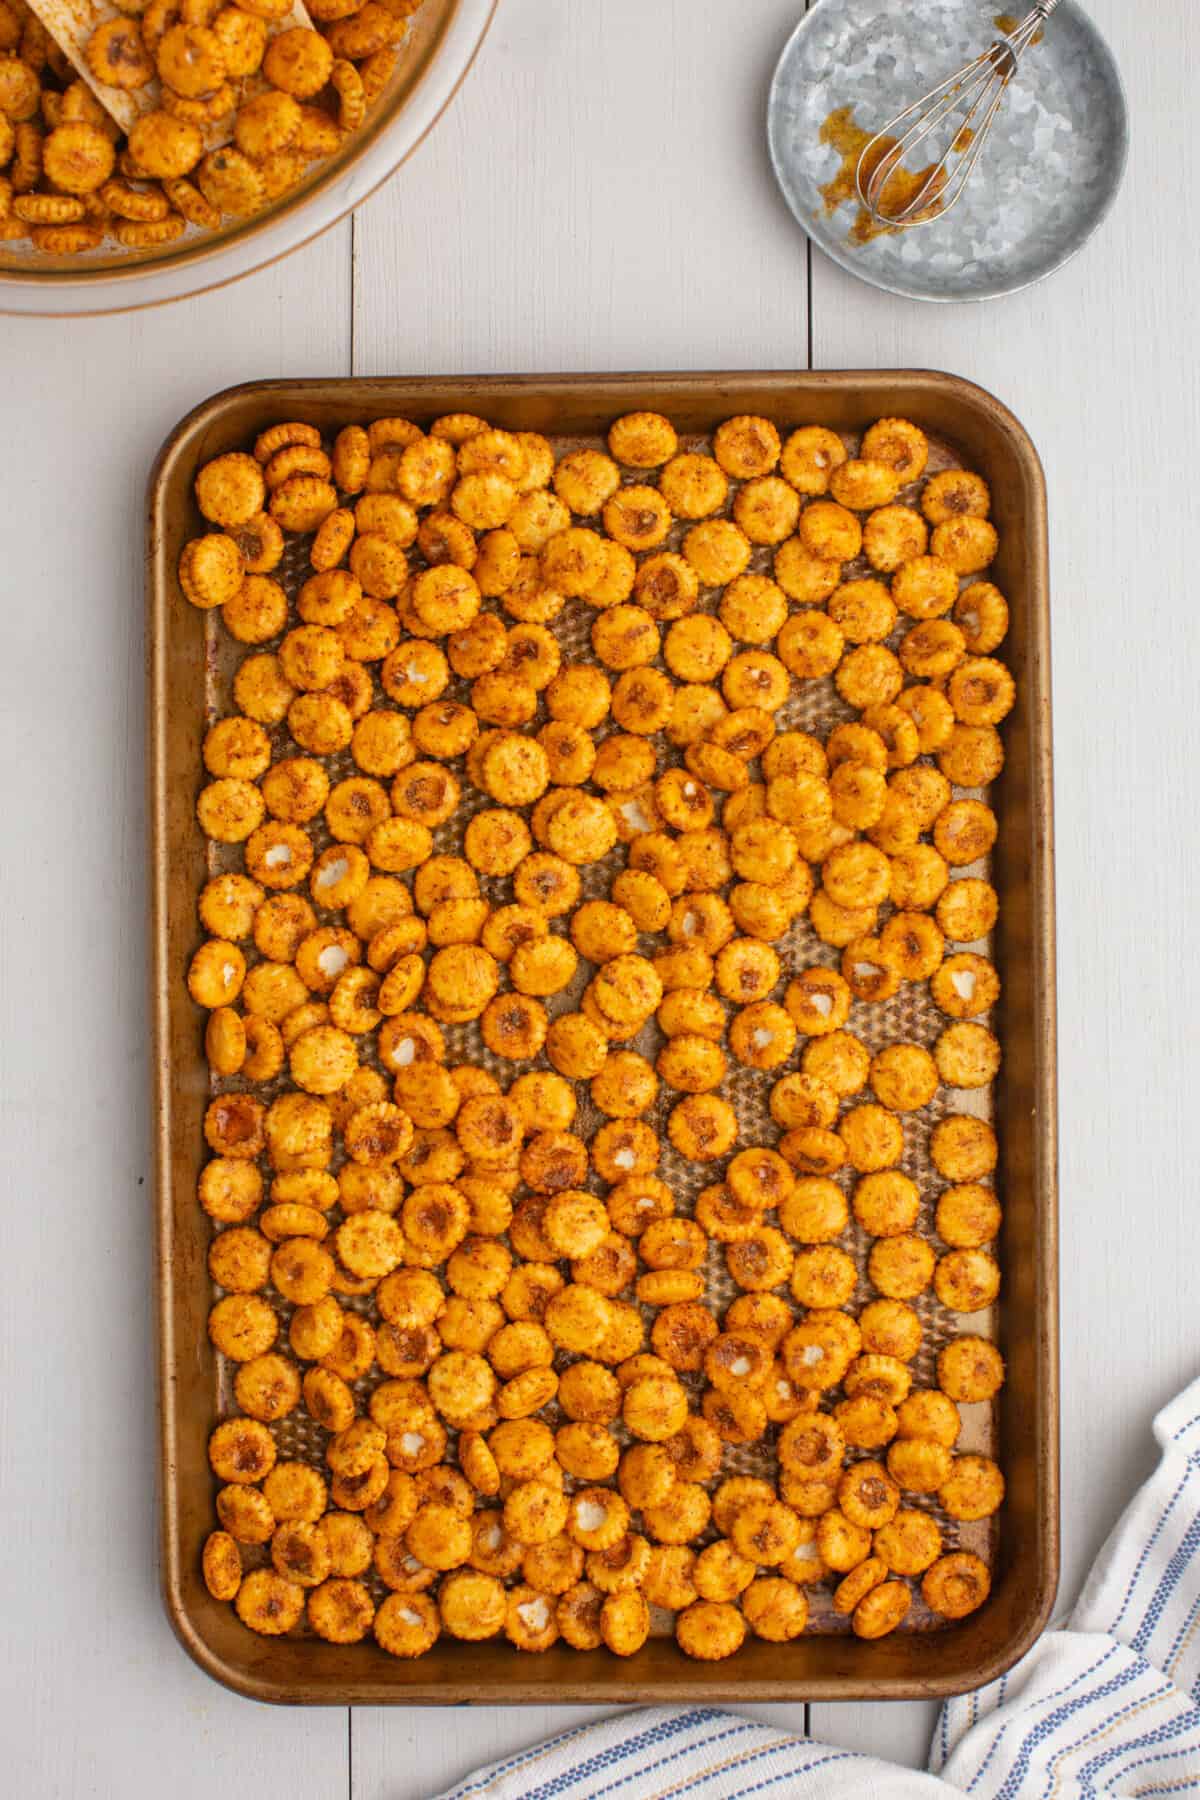 Taco Oyster Crackers Mixed and Spread out on Lined Baking Pan Ready for the Oven